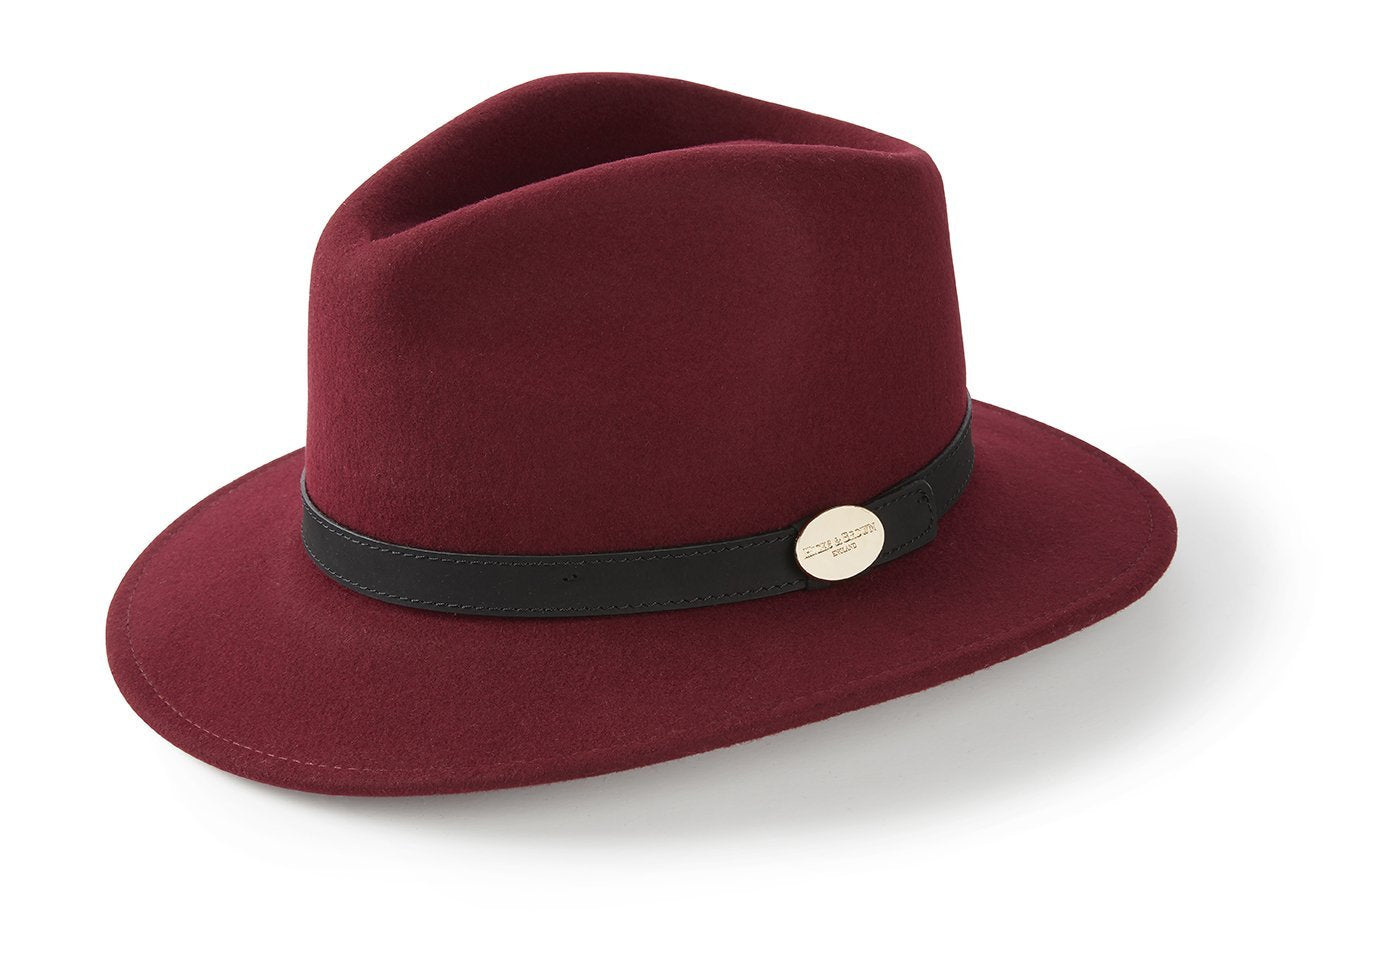 Hicks & Brown Fedora The Suffolk Fedora in Maroon (No Feather)